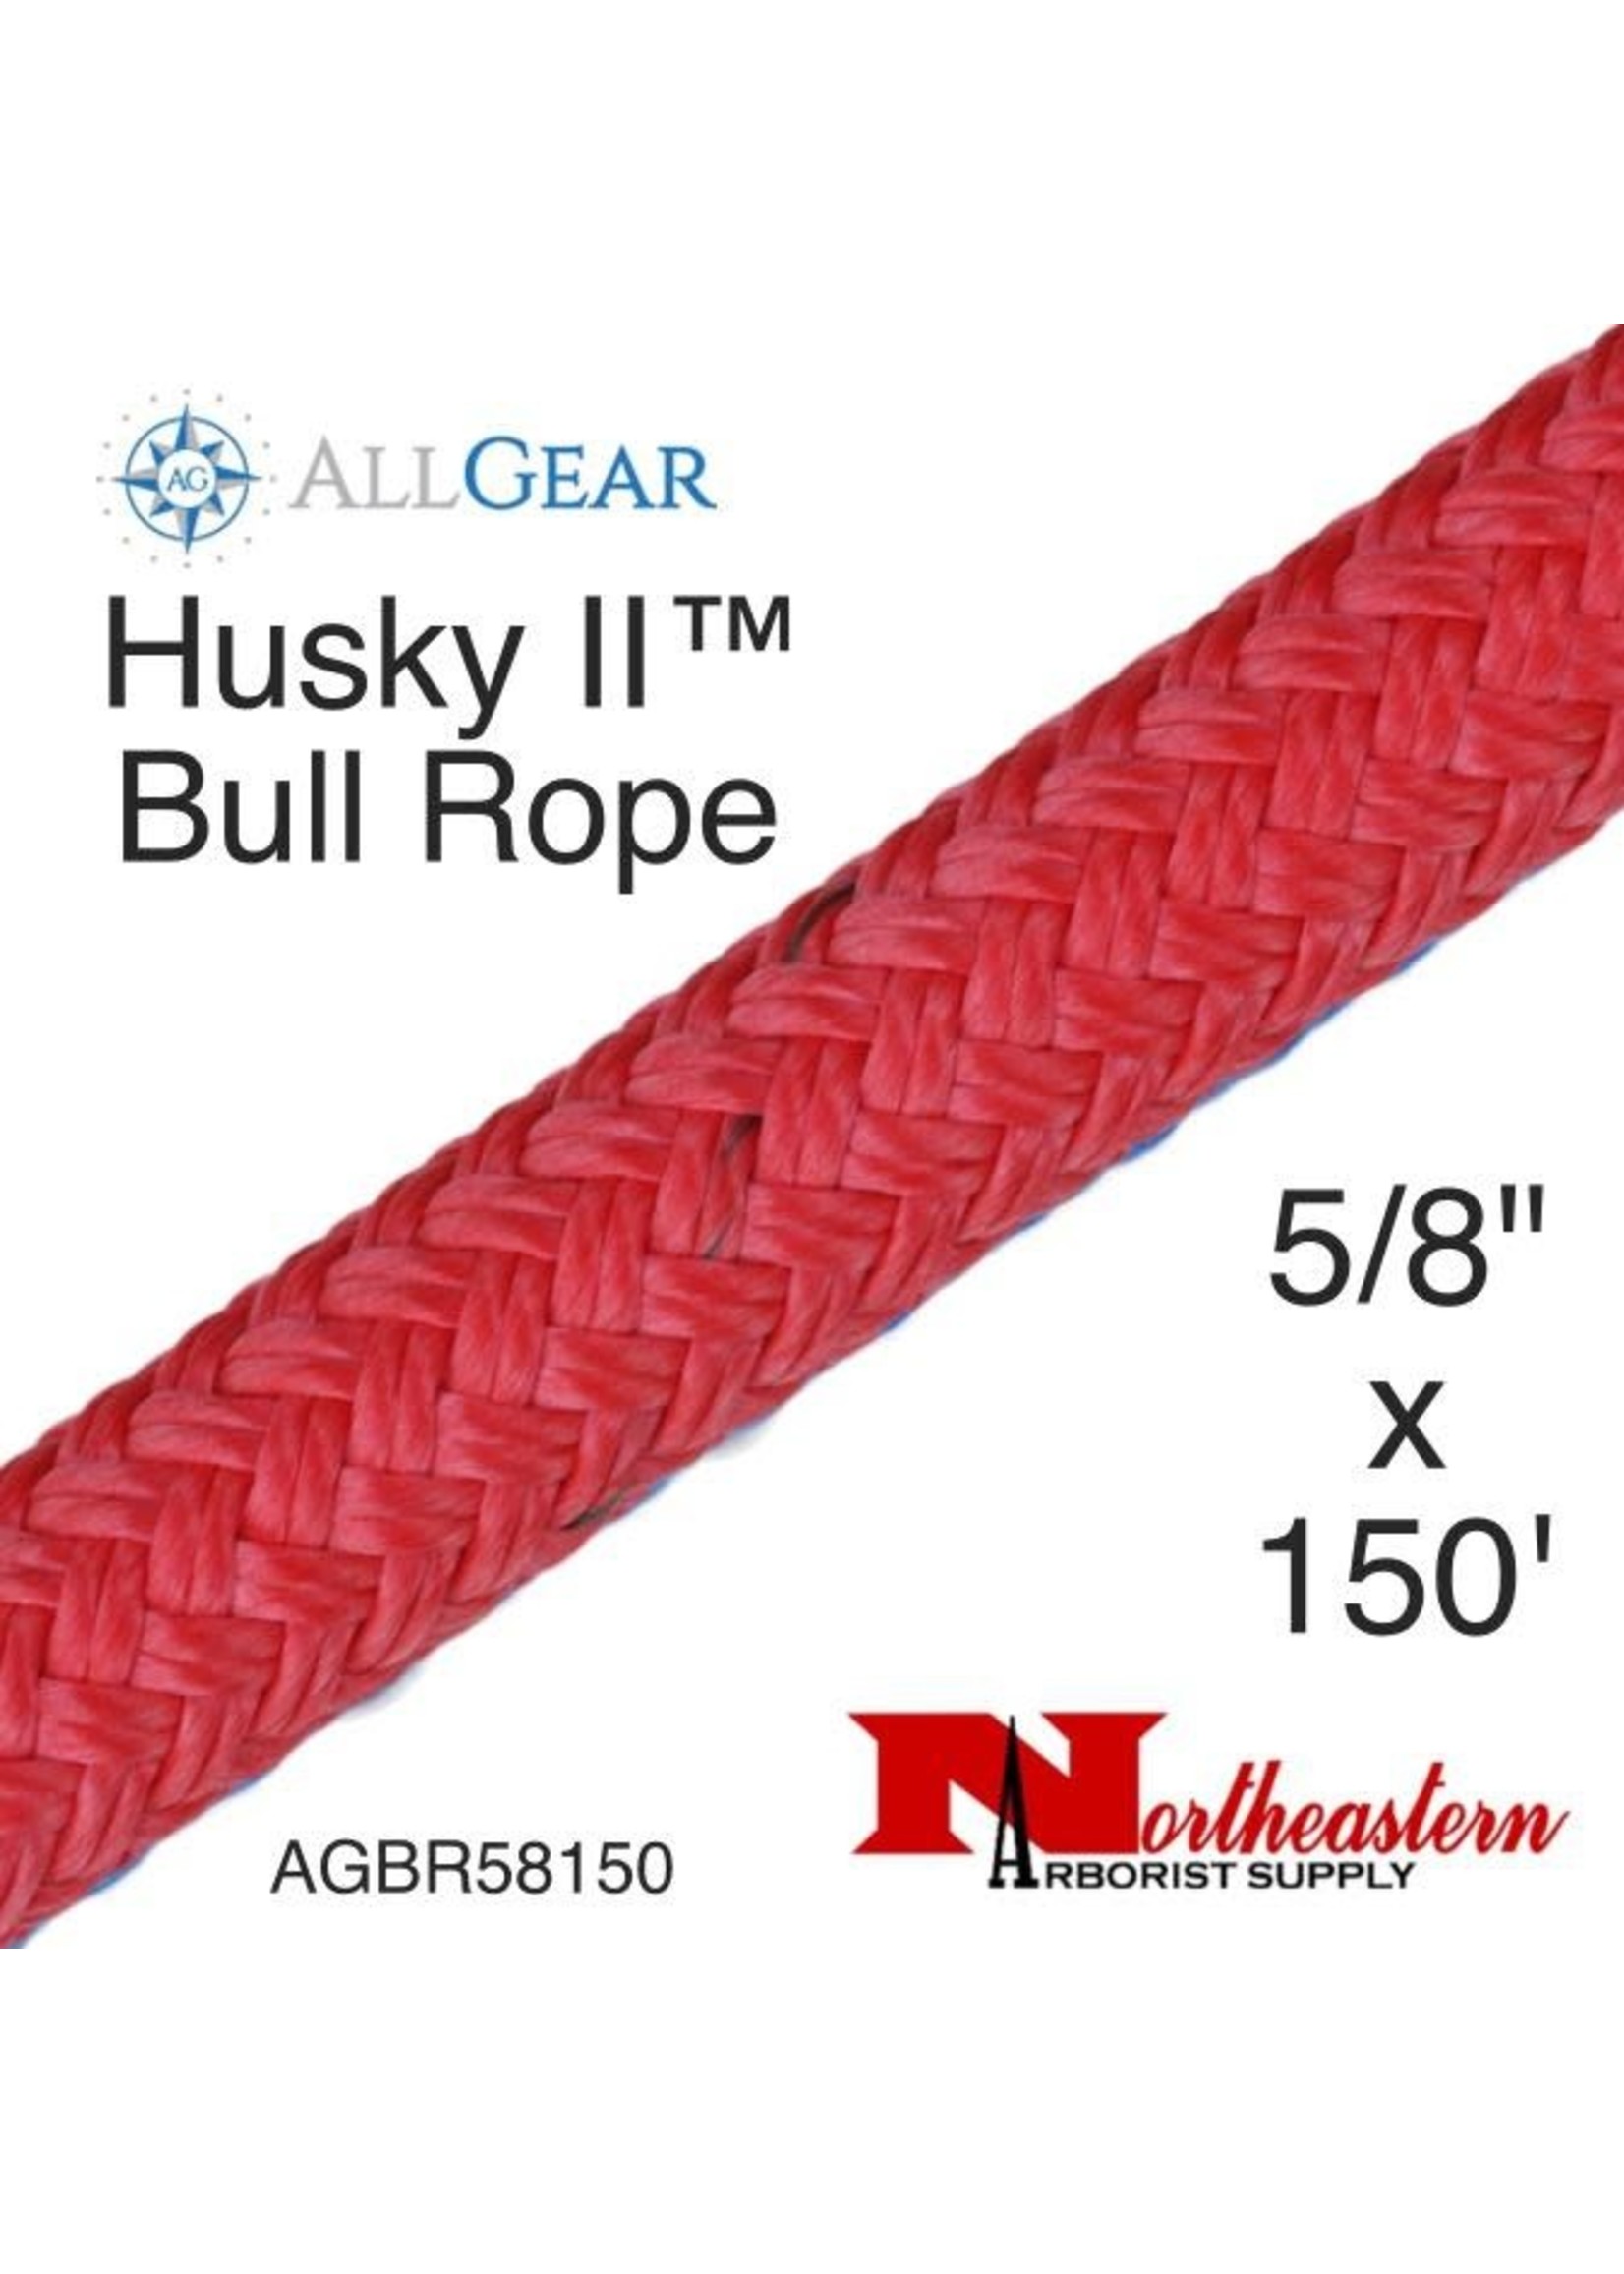 All Gear Inc. Husky II Bull Rope 5/8" x 150' 18000 Lbs ABS, Red with Green Tracer